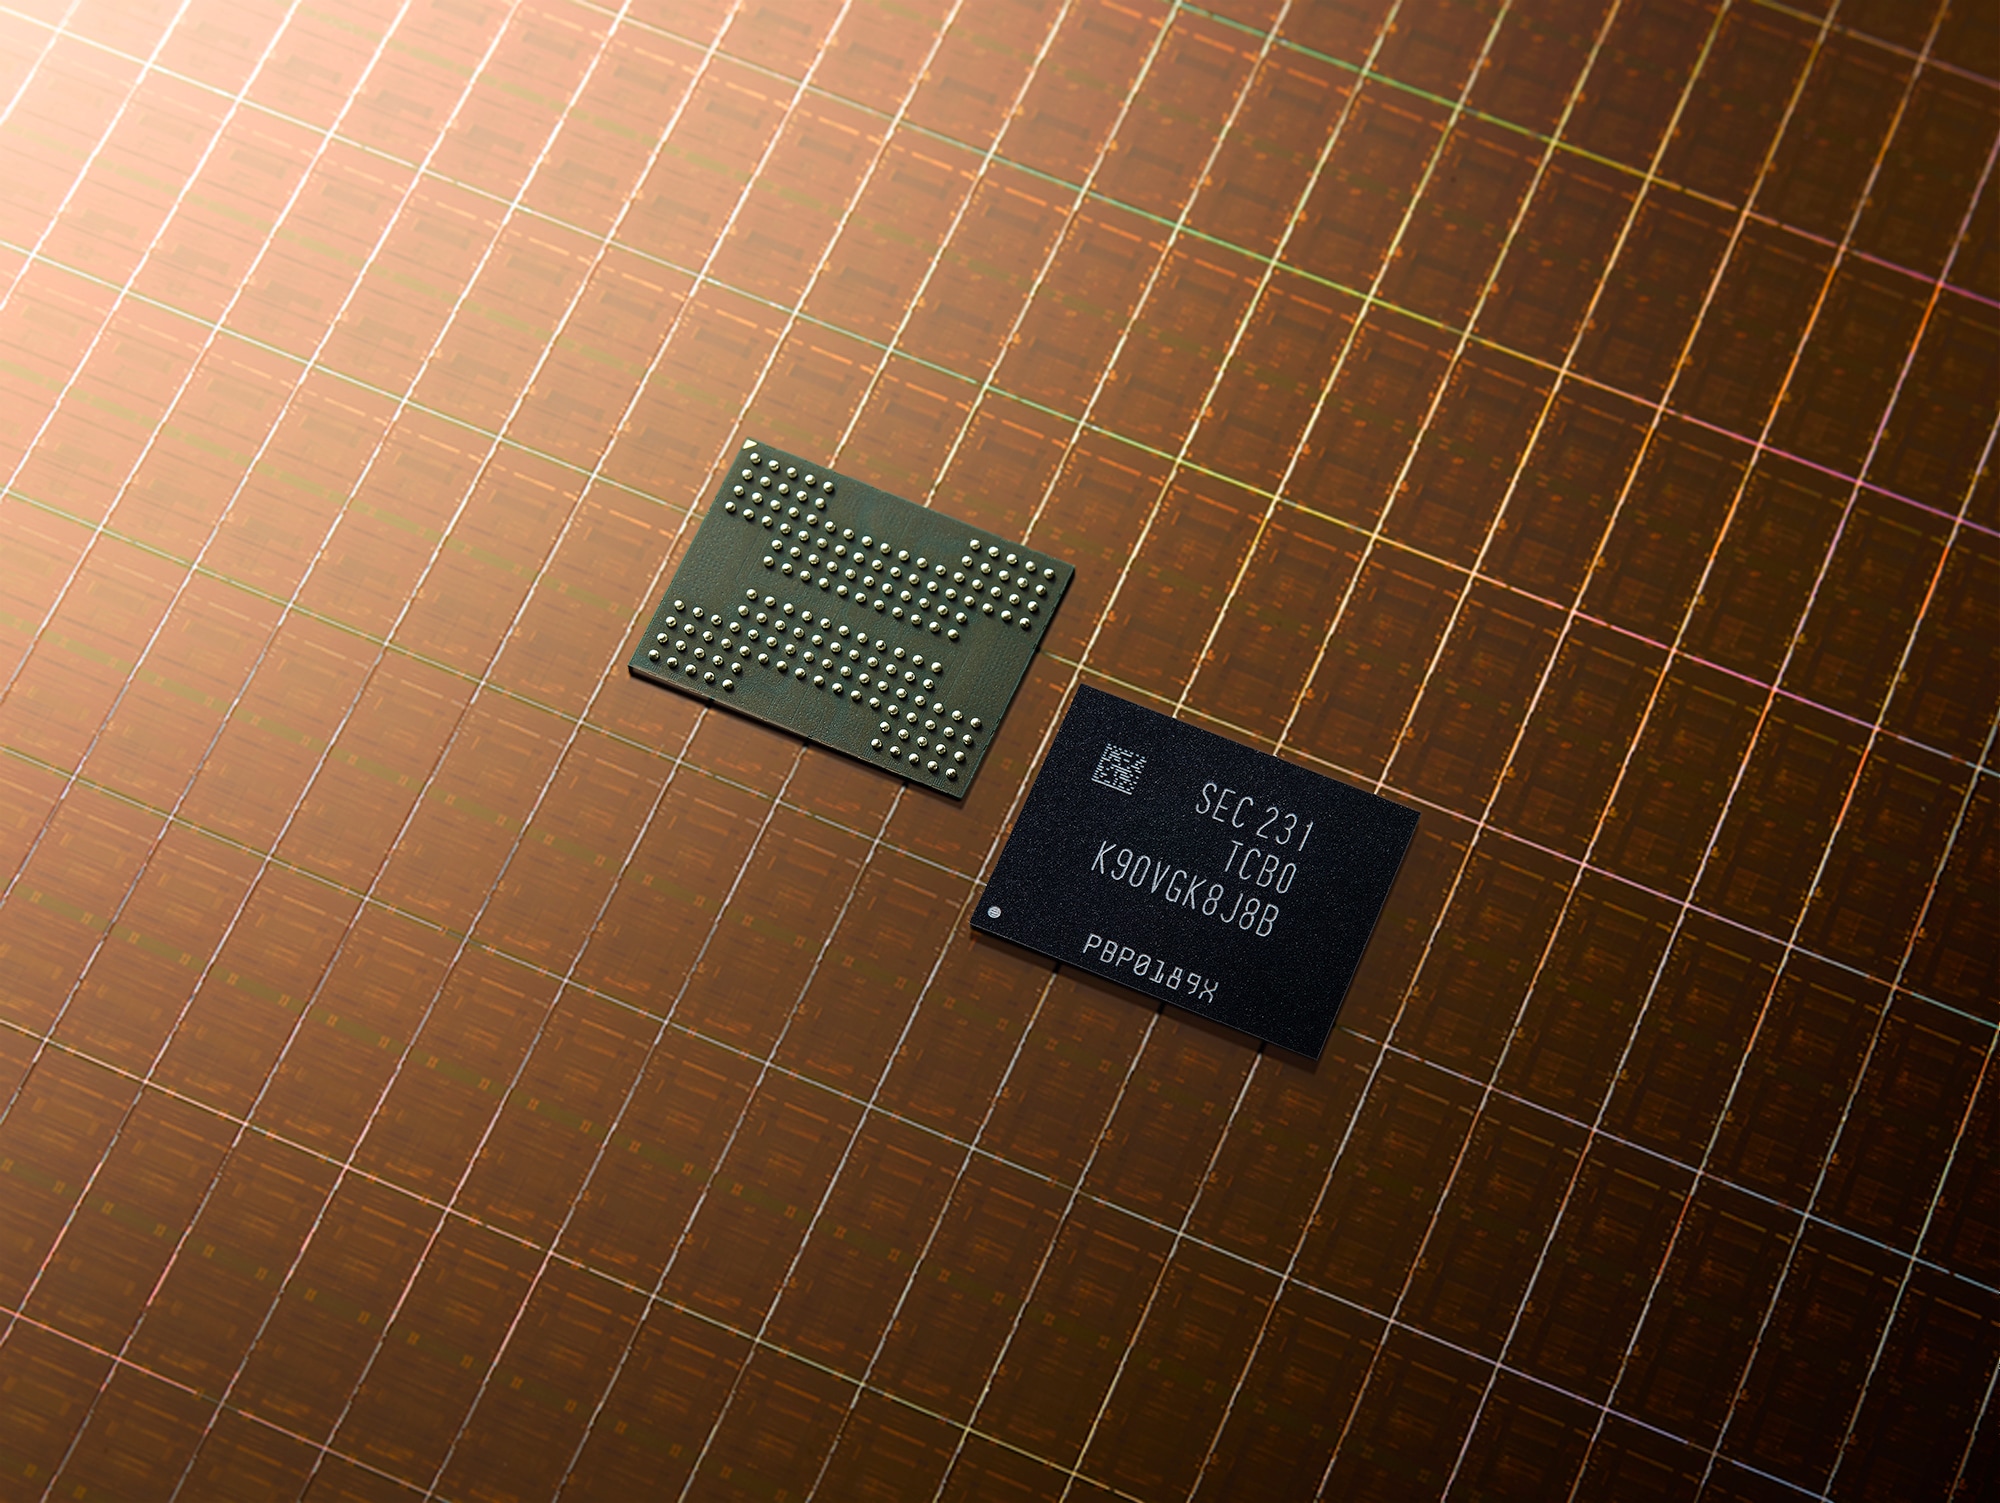 These are the front and back of Samsung Electronics' 8th generation V-NAND.